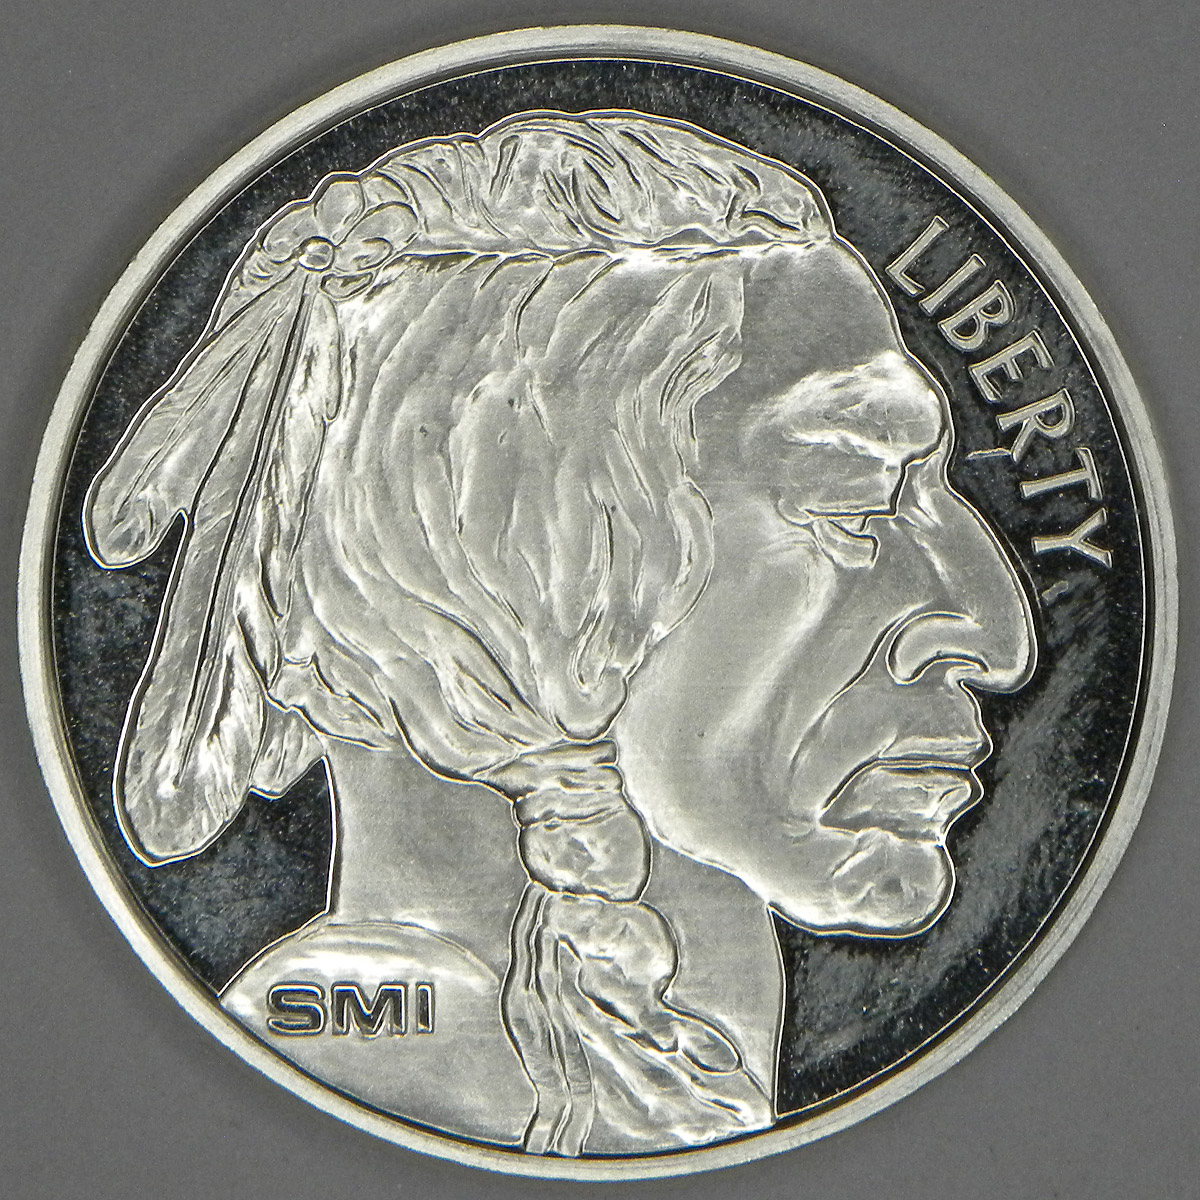 One Ounce Silver Round with Buffalo Nickel design (obverse)